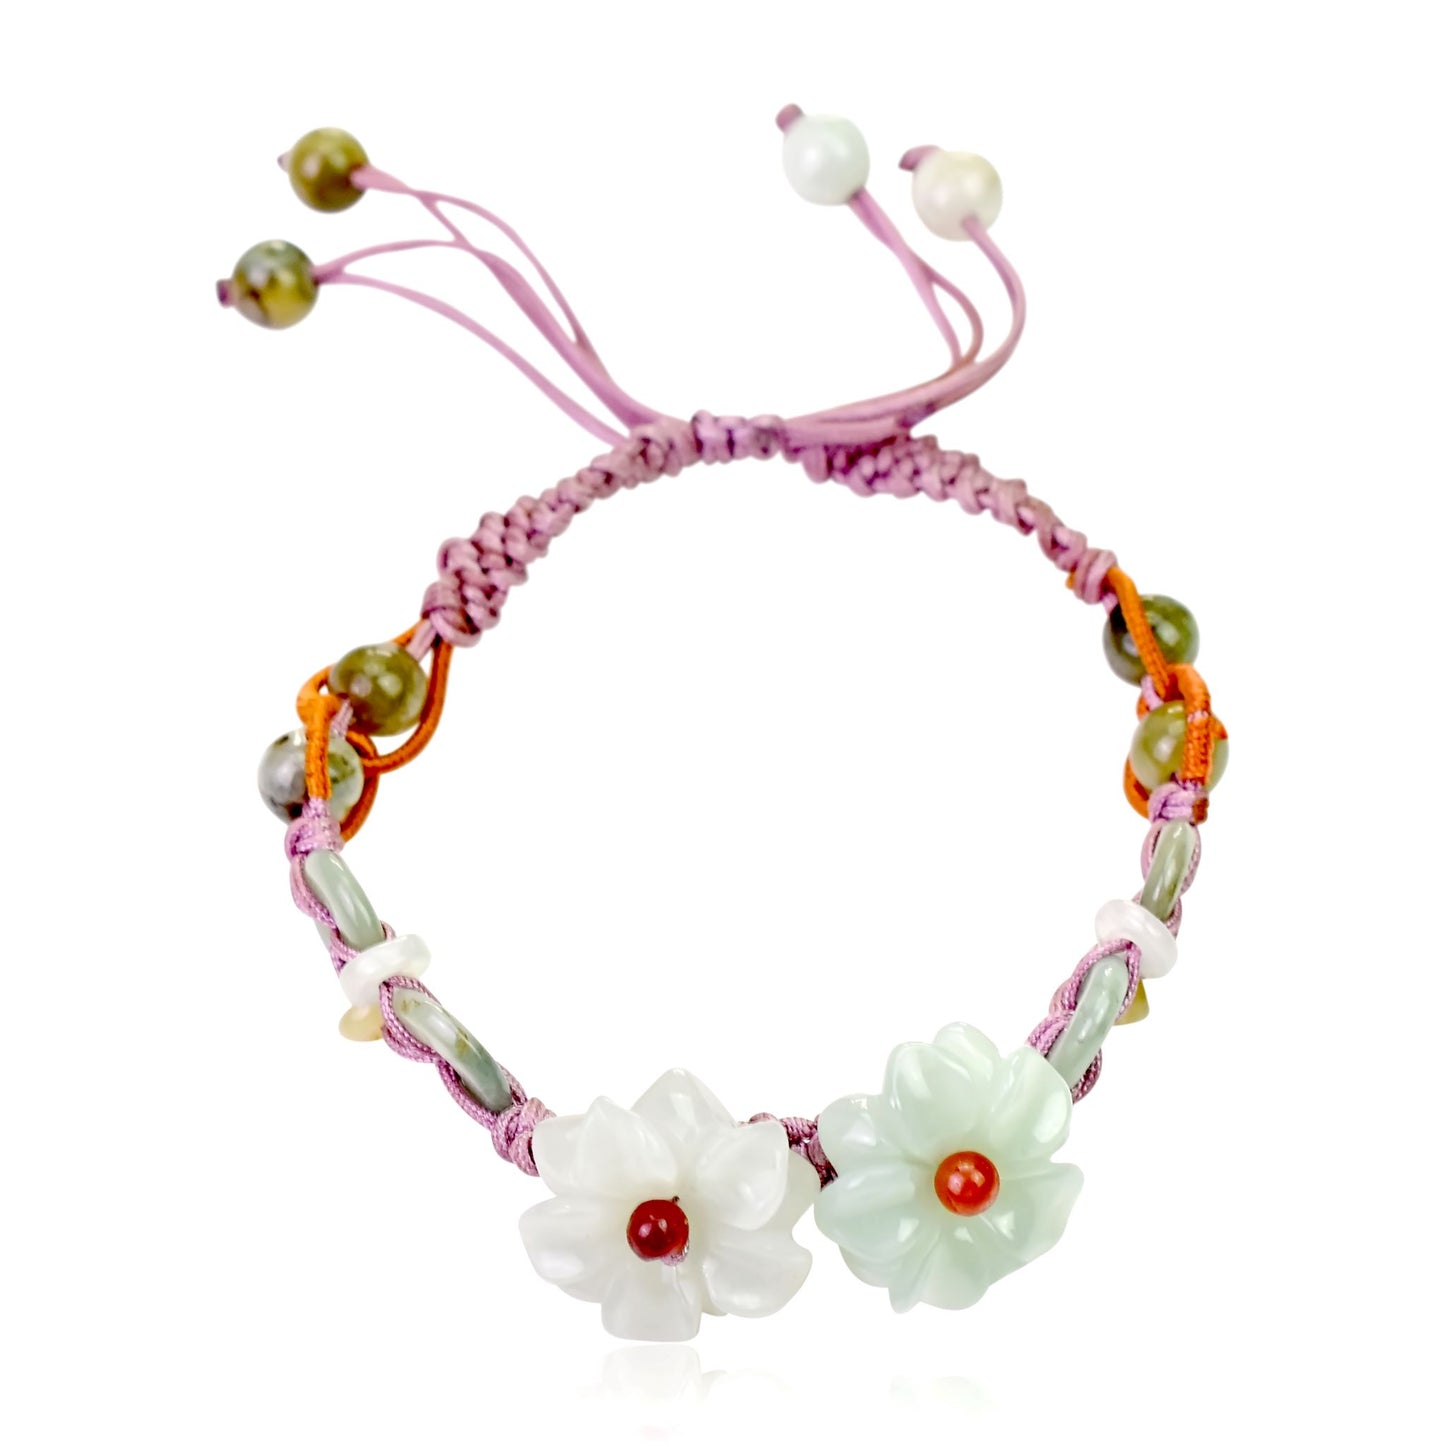 Be Uniquely Stylish with the Double Mums Adjustable Charm Bracelet made with Lavender Cord